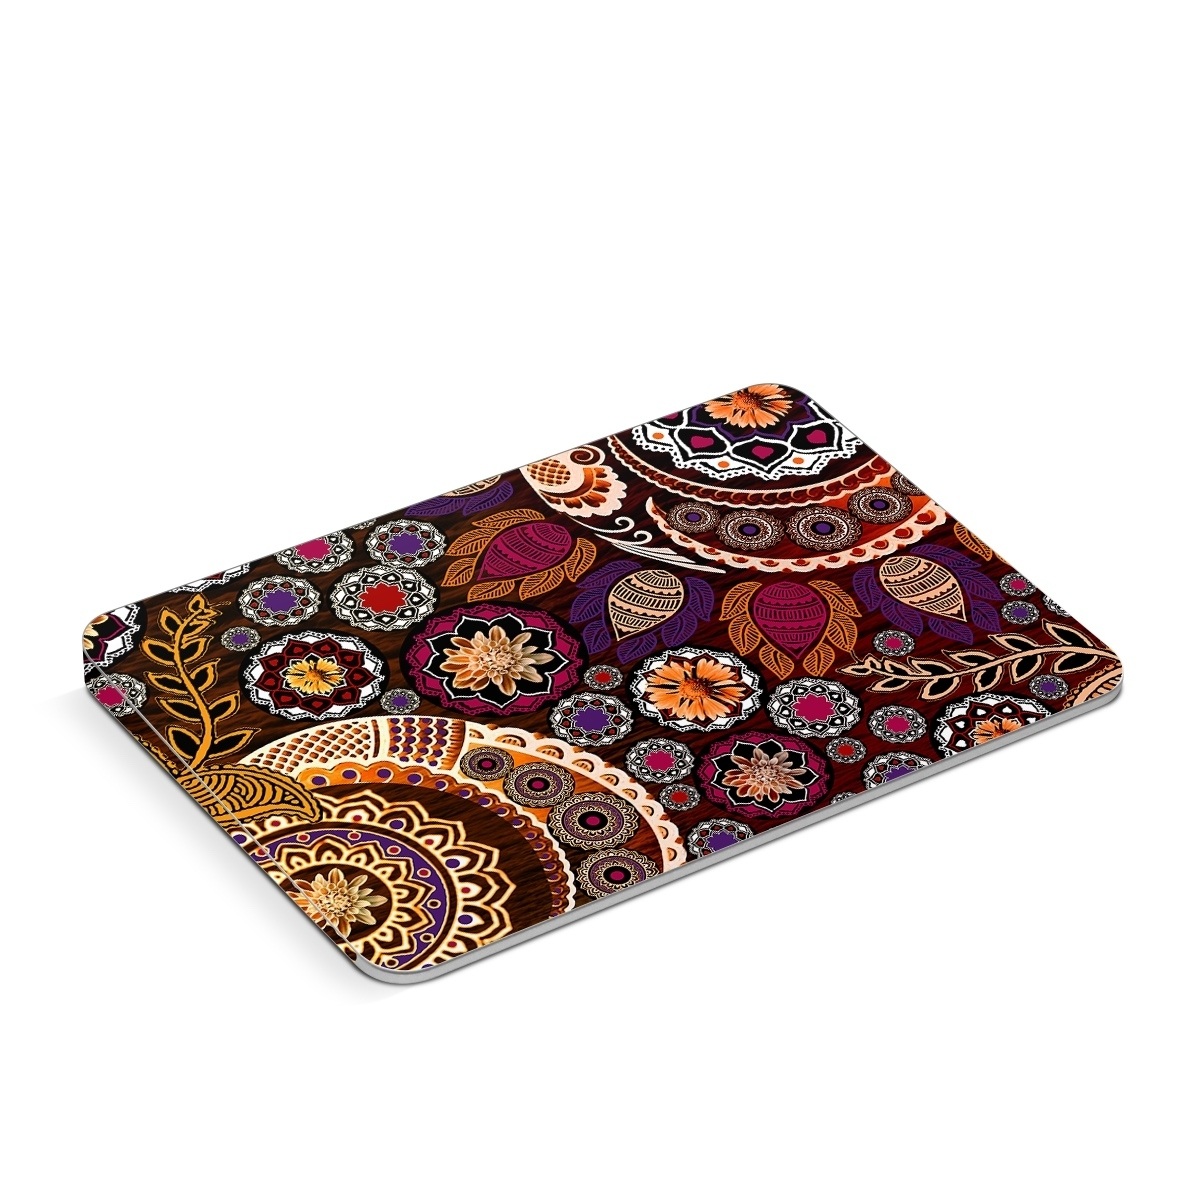 Apple Magic Trackpad Skin design of Pattern, Motif, Visual arts, Design, Art, Floral design, Textile, Paisley, Tapestry, Circle, with brown, purple, red, white, black colors